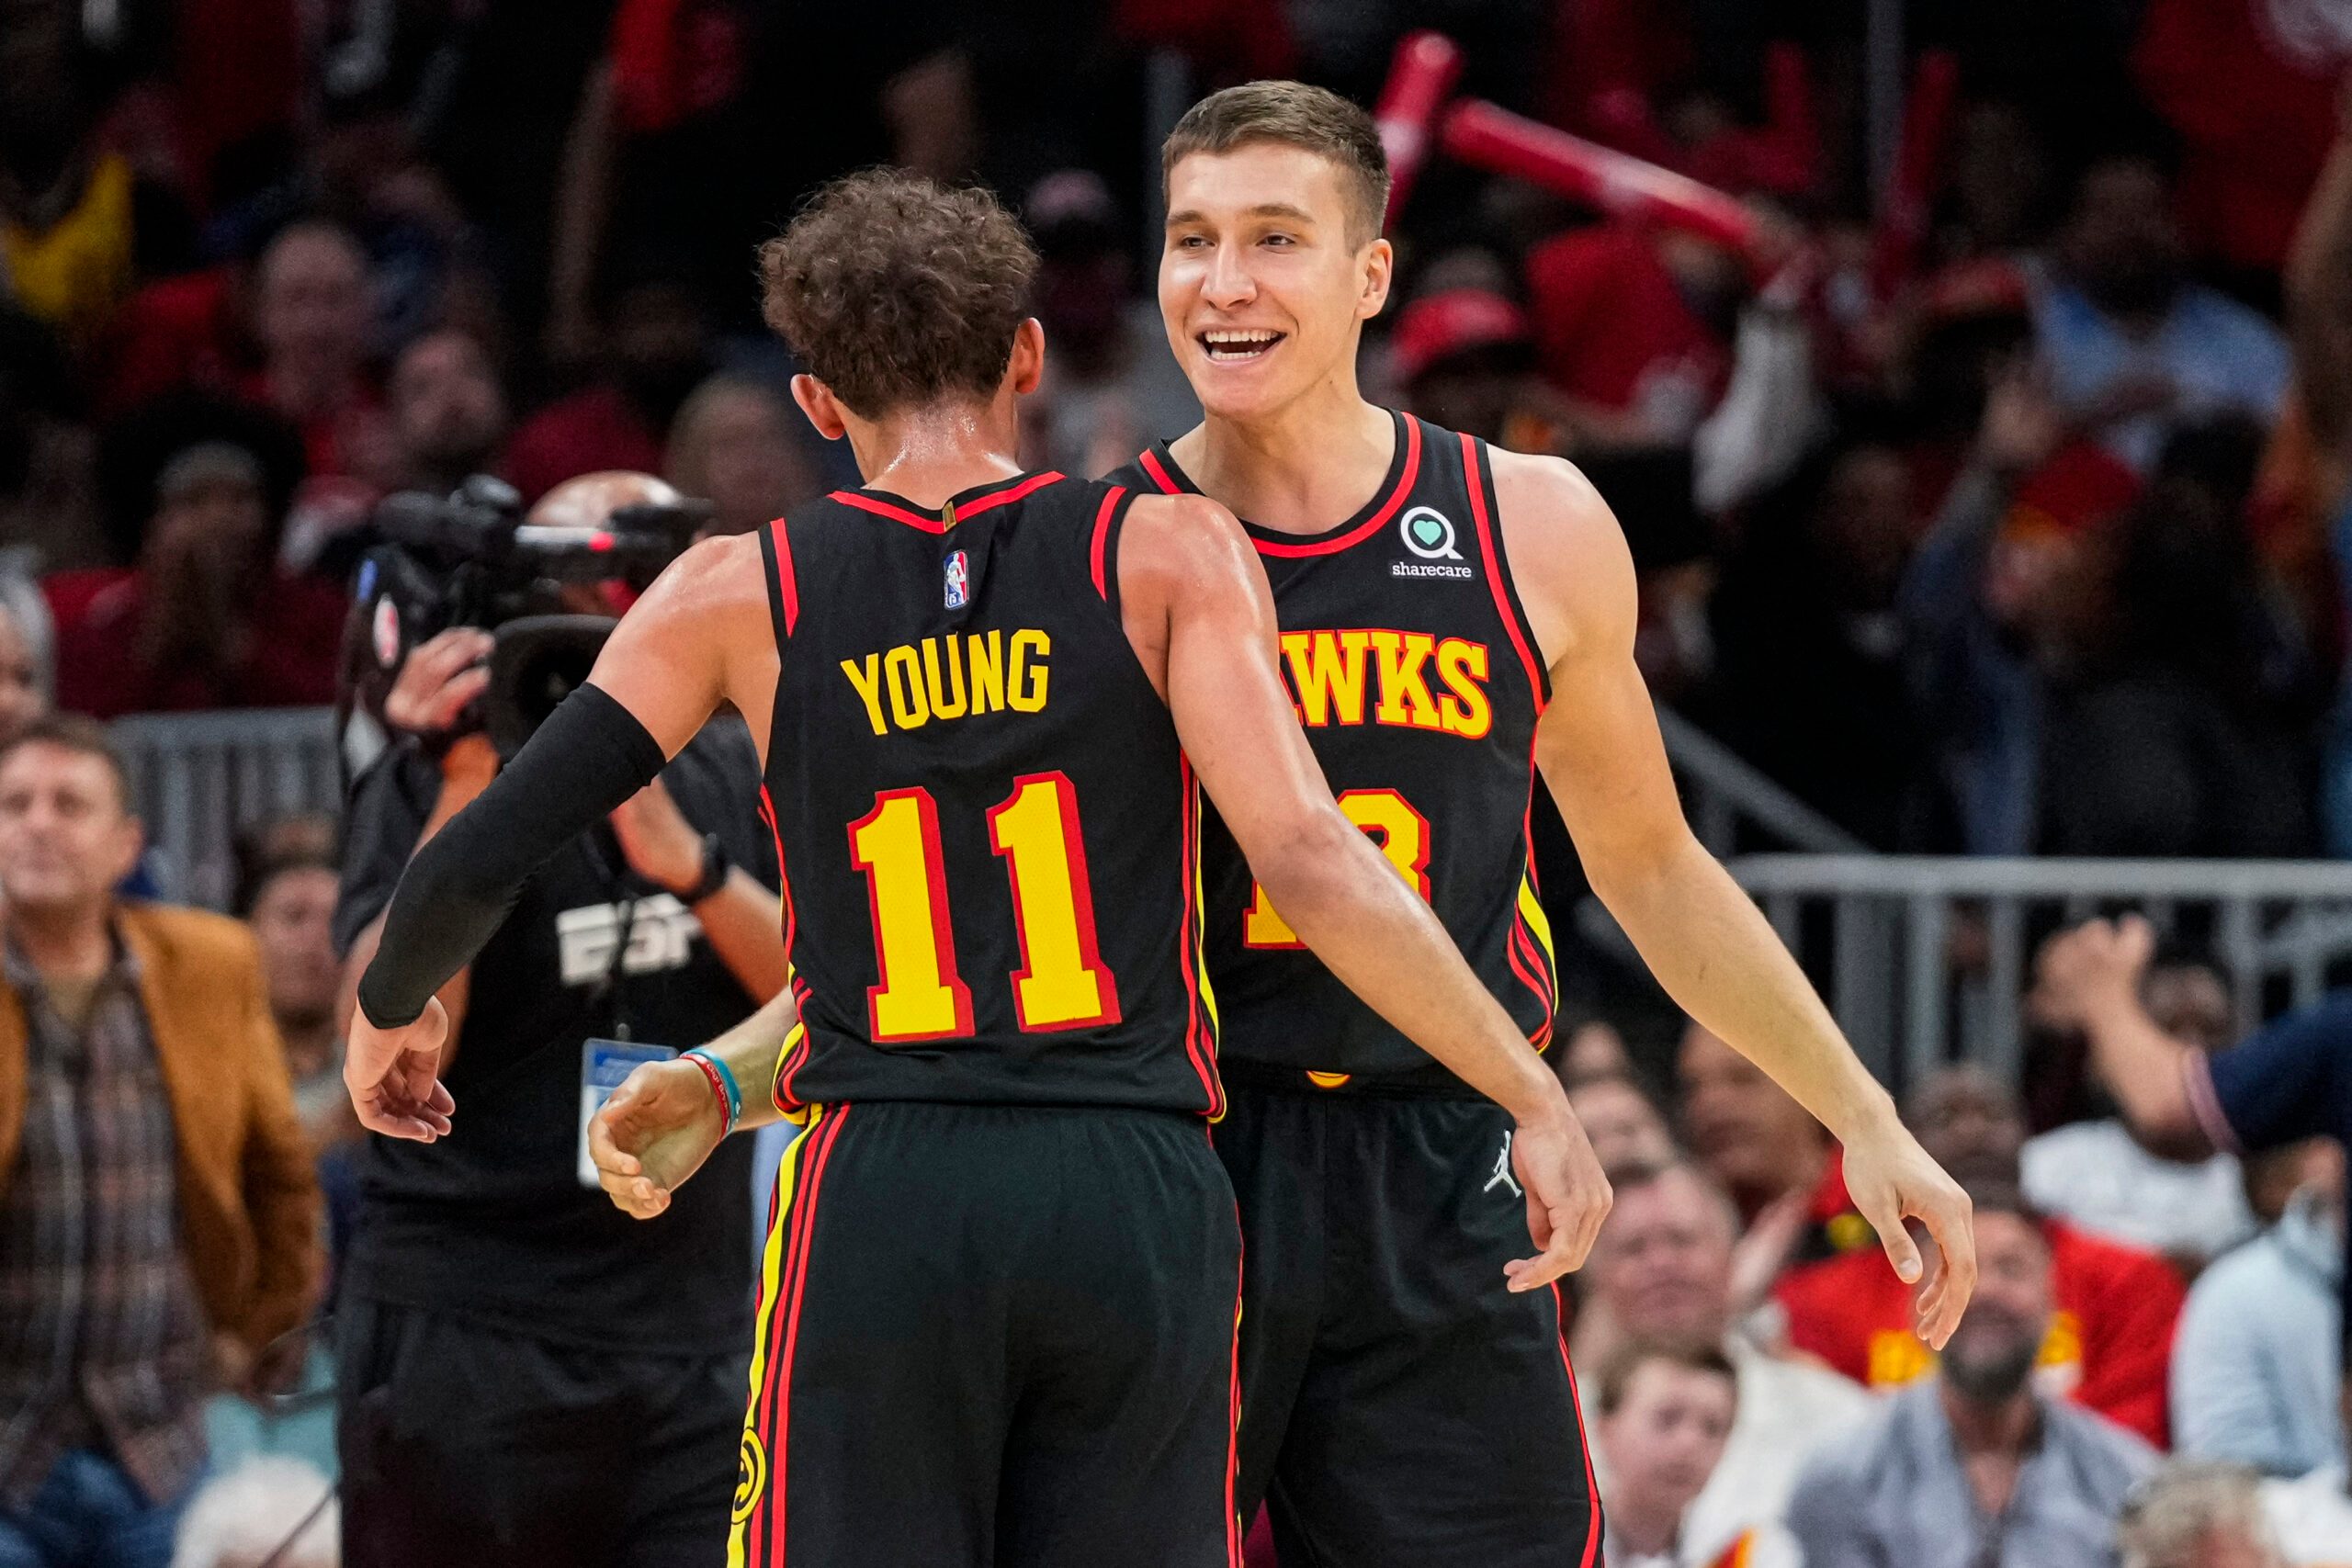 Hawks clip Hornets, advance to play-in matchup with Cavaliers